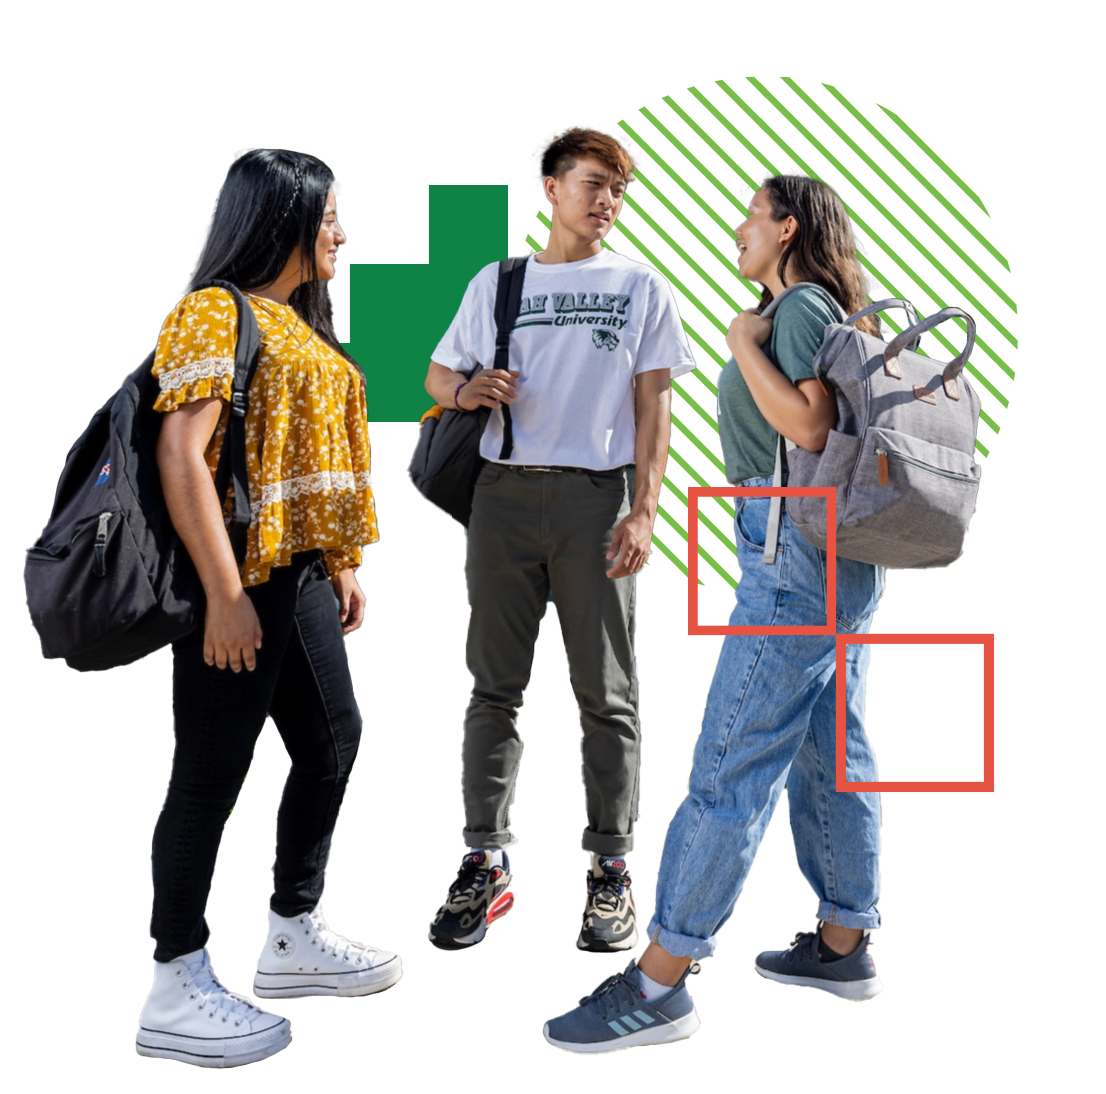 Three students standing in a group. The image is embellished with colorful graphic elements.